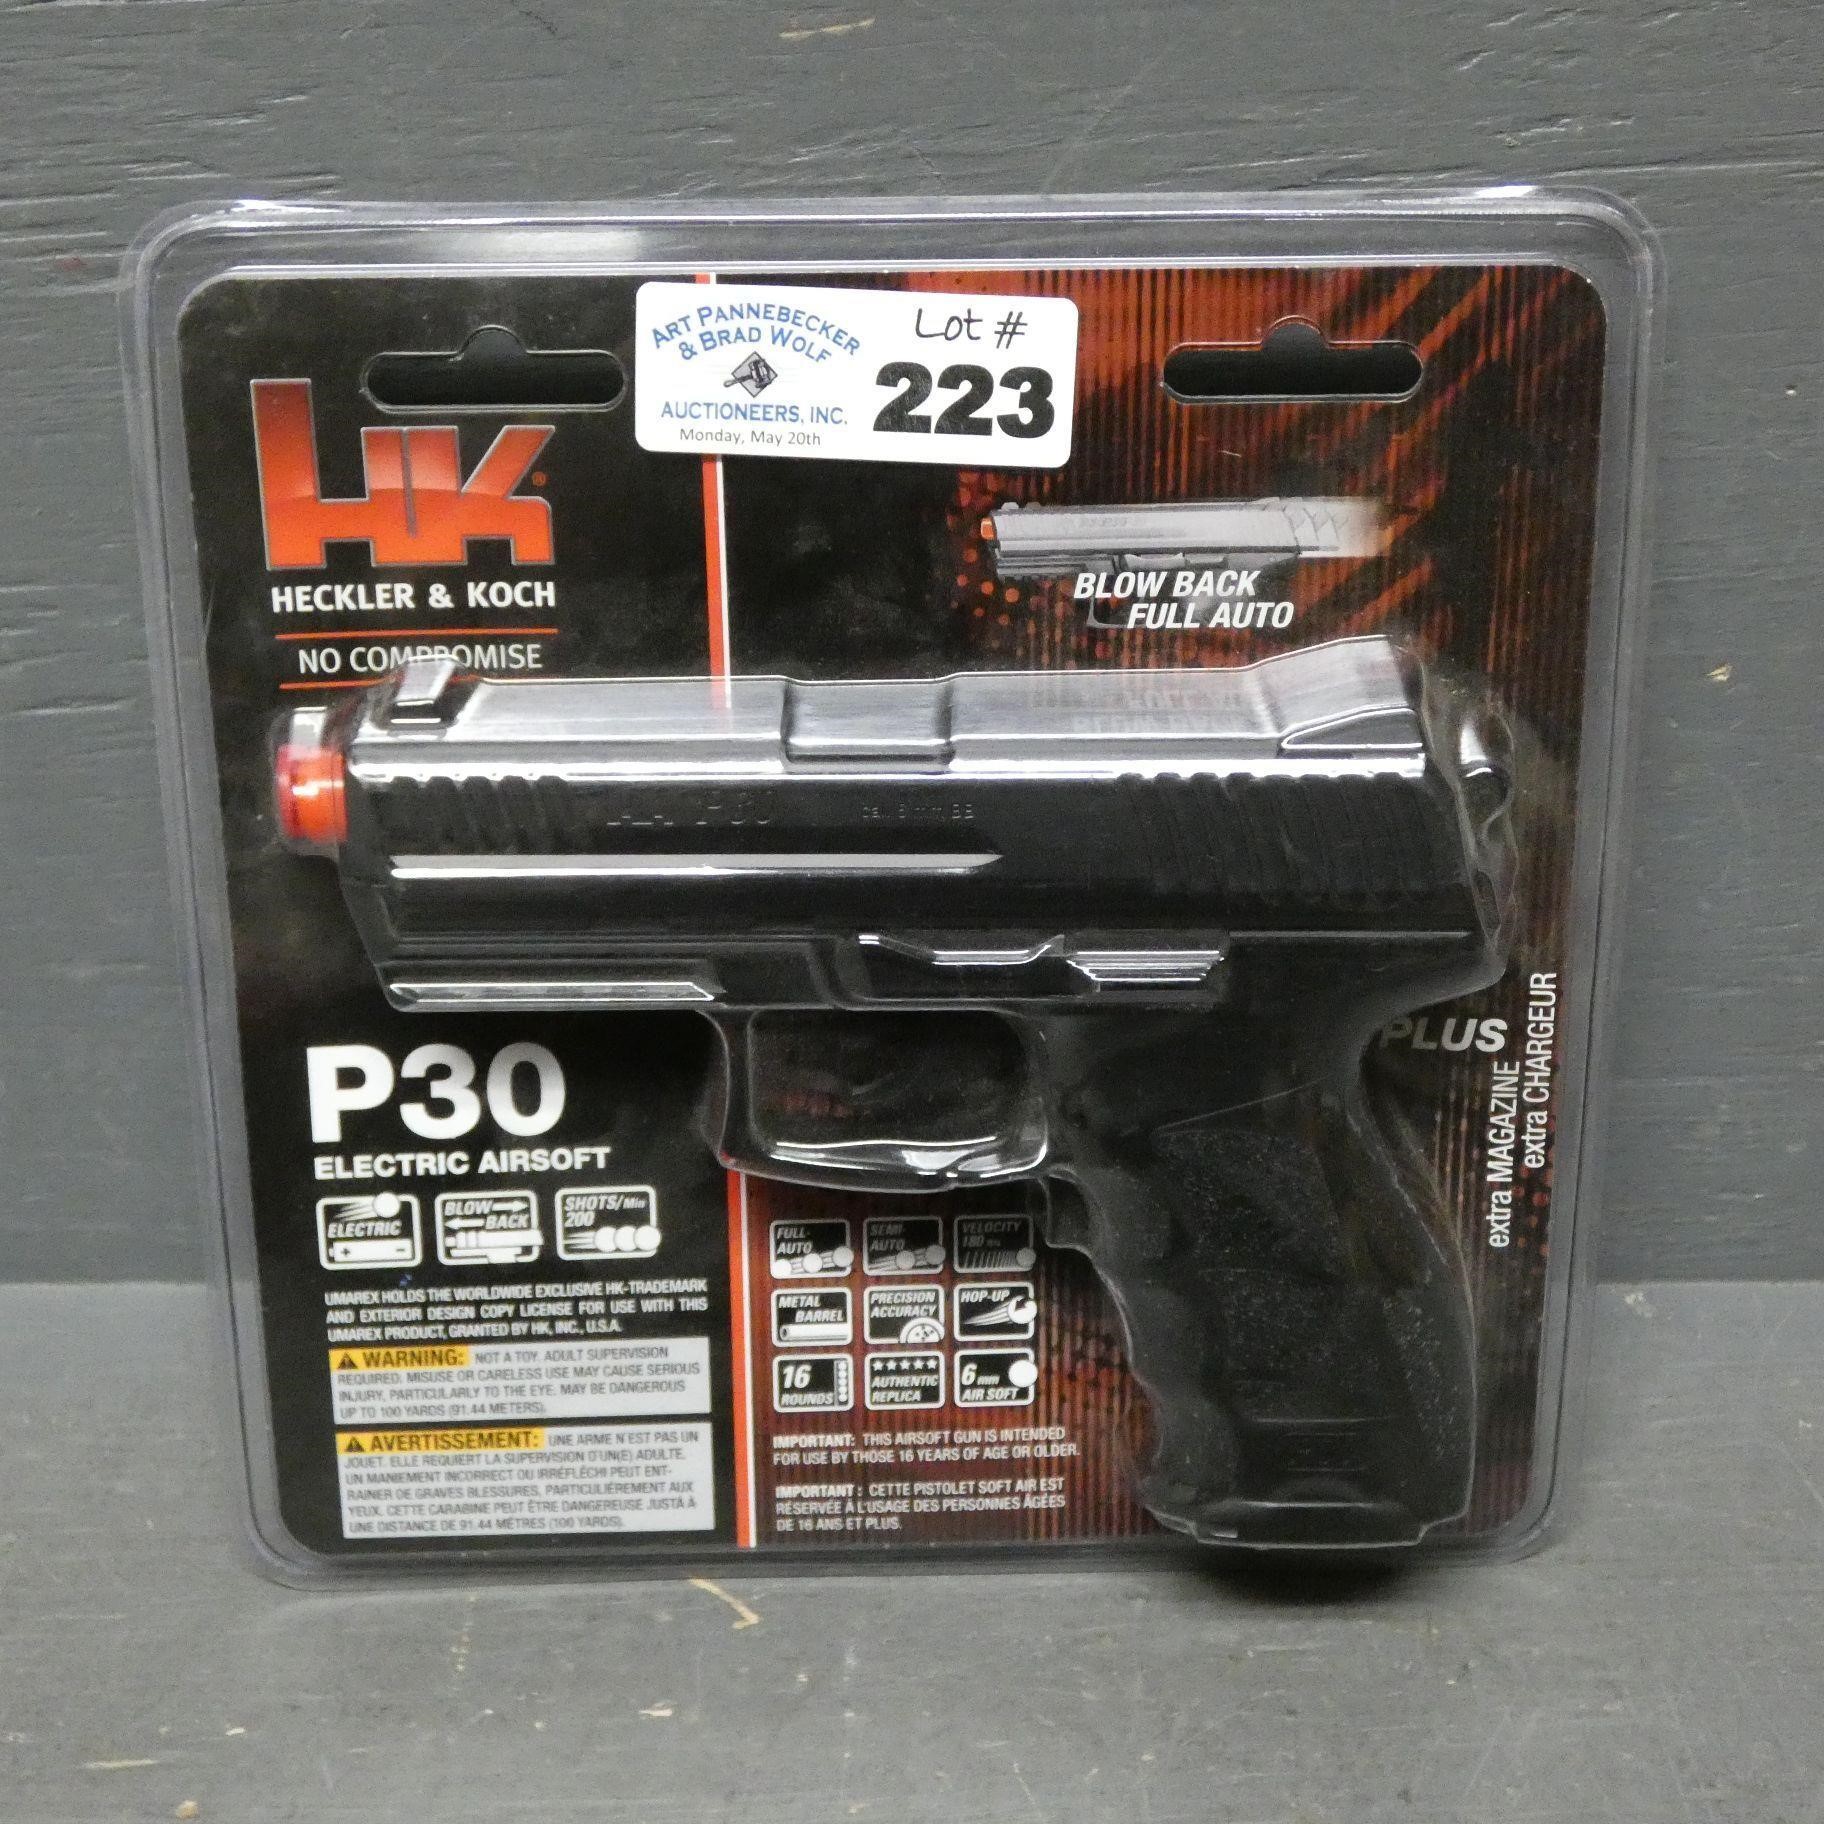 New Heckler & Koch P30 Electronic Airsoft Pistol